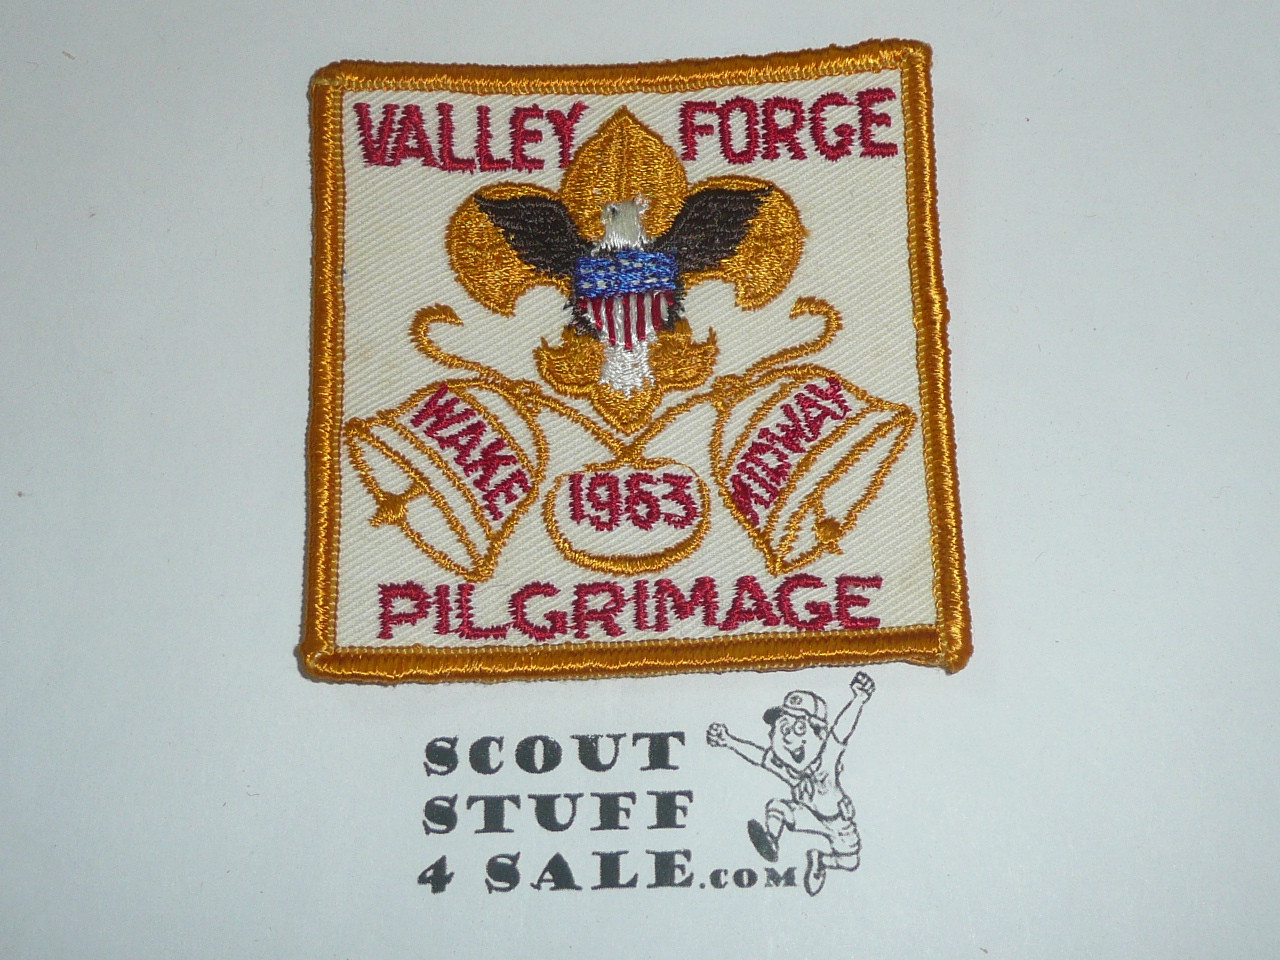 Valley Forge Council Pilgrimage, 1963